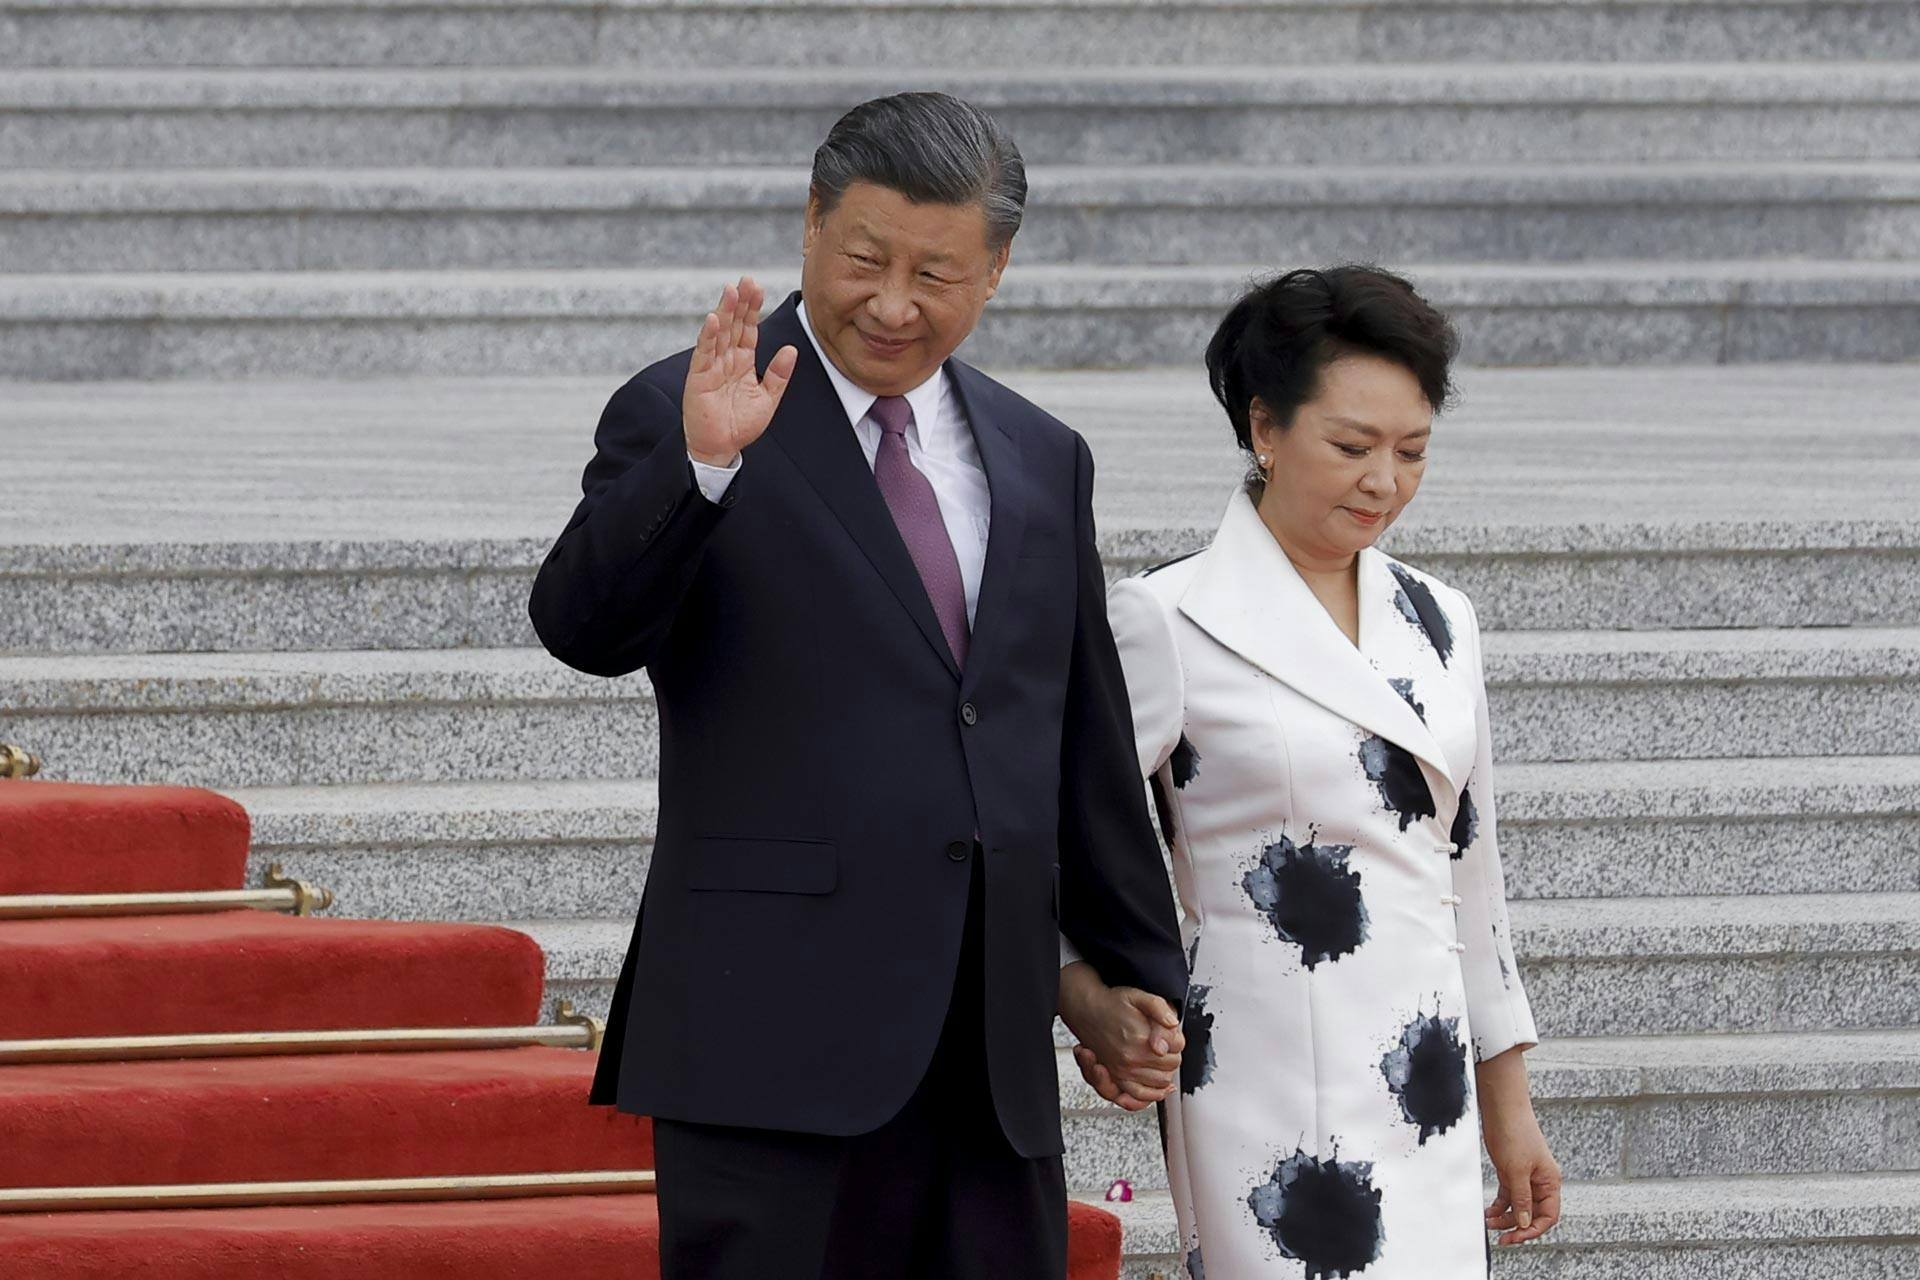 President Xi Jinping and his wife Peng Liyuan attend a welcoming ceremony at the Great Hall of the People in Beijing